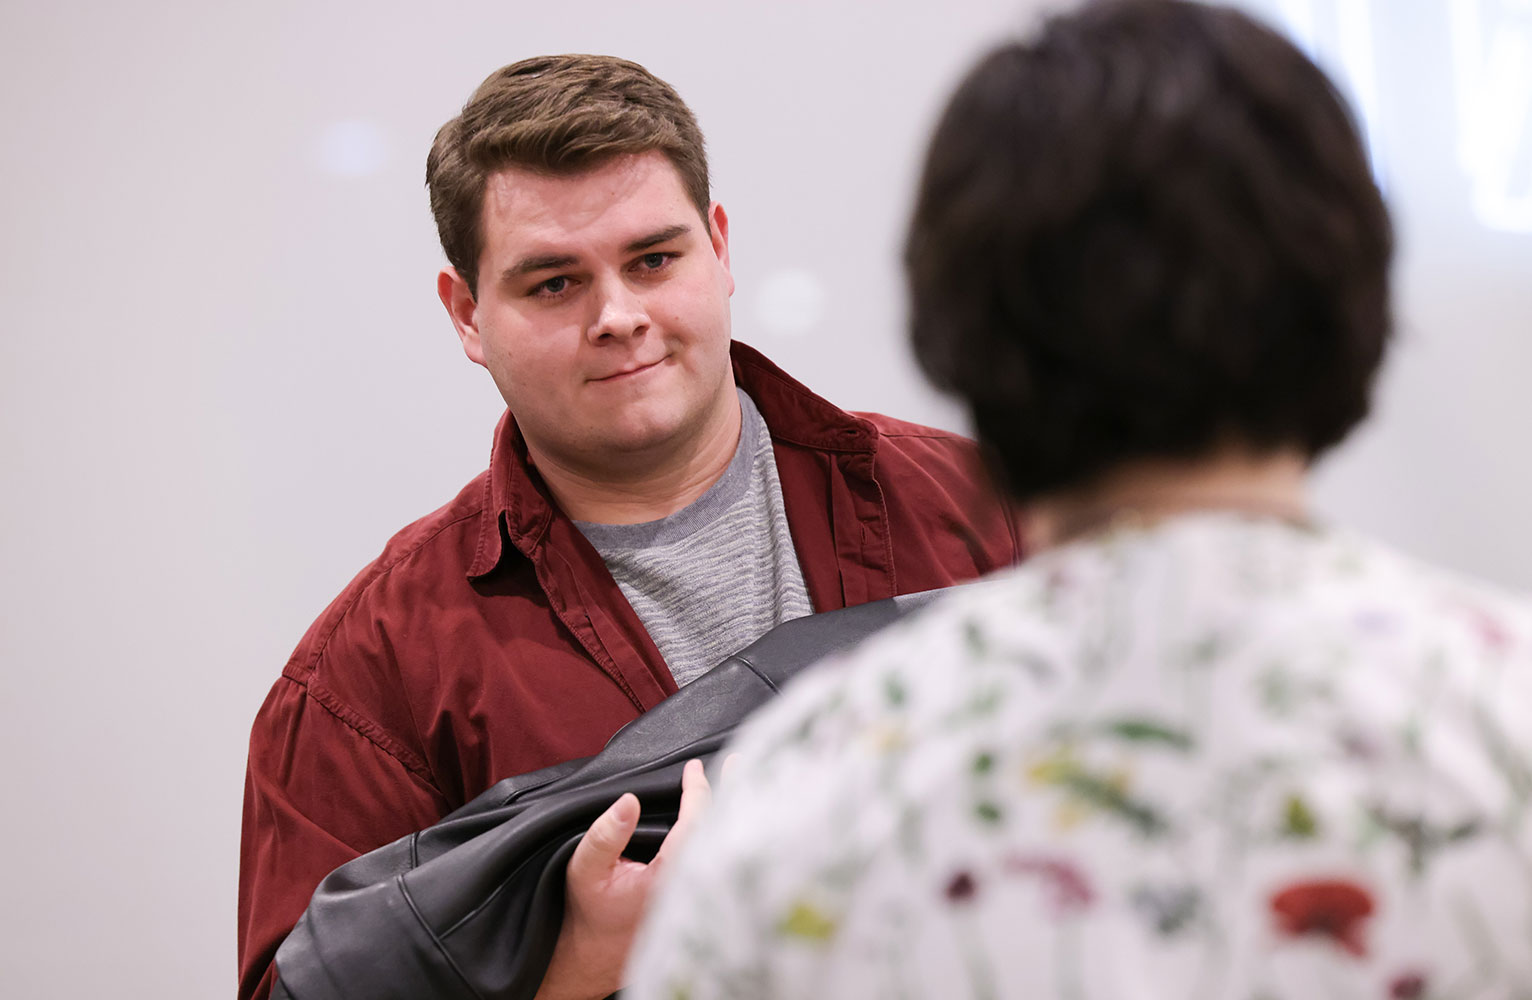 Matthew Donahue interacts with a member of the audience during a performance of Every Brilliant Thing.